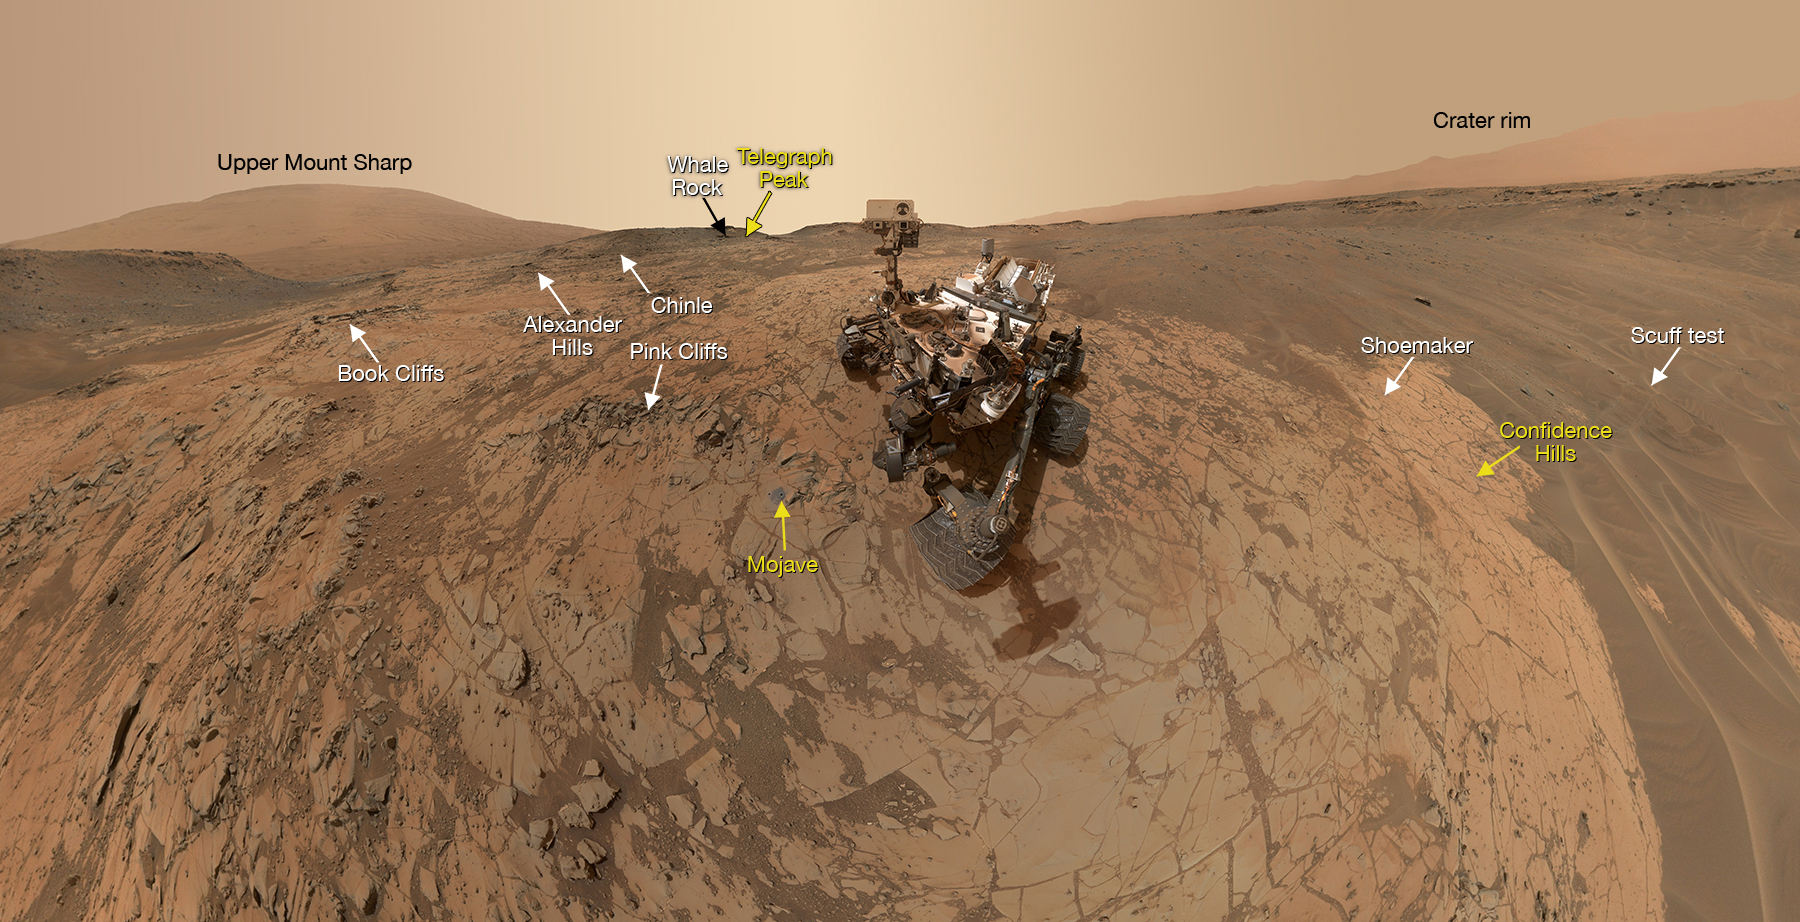 This self-portrait of NASA's Curiosity Mars rover shows the vehicle at the "Mojave" site, where its drill collected the mission's second taste of Mount Sharp. The scene combines dozens of images taken during January 2015 by the MAHLI camera at the end of the rover's robotic arm. Image Credit:   NASA/JPL-Caltech/MSSS    